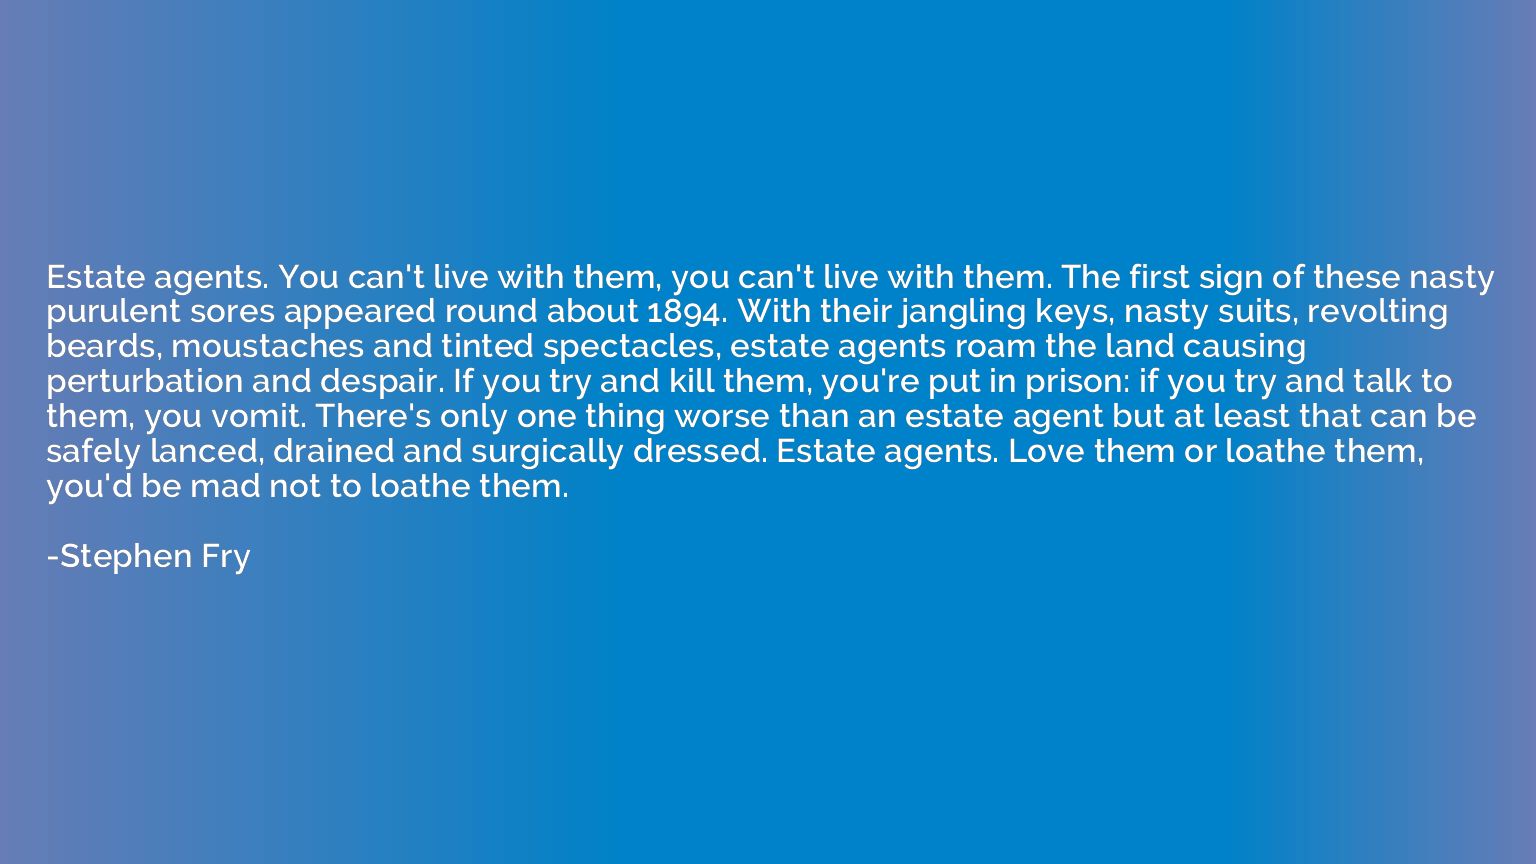 Estate agents. You can't live with them, you can't live with